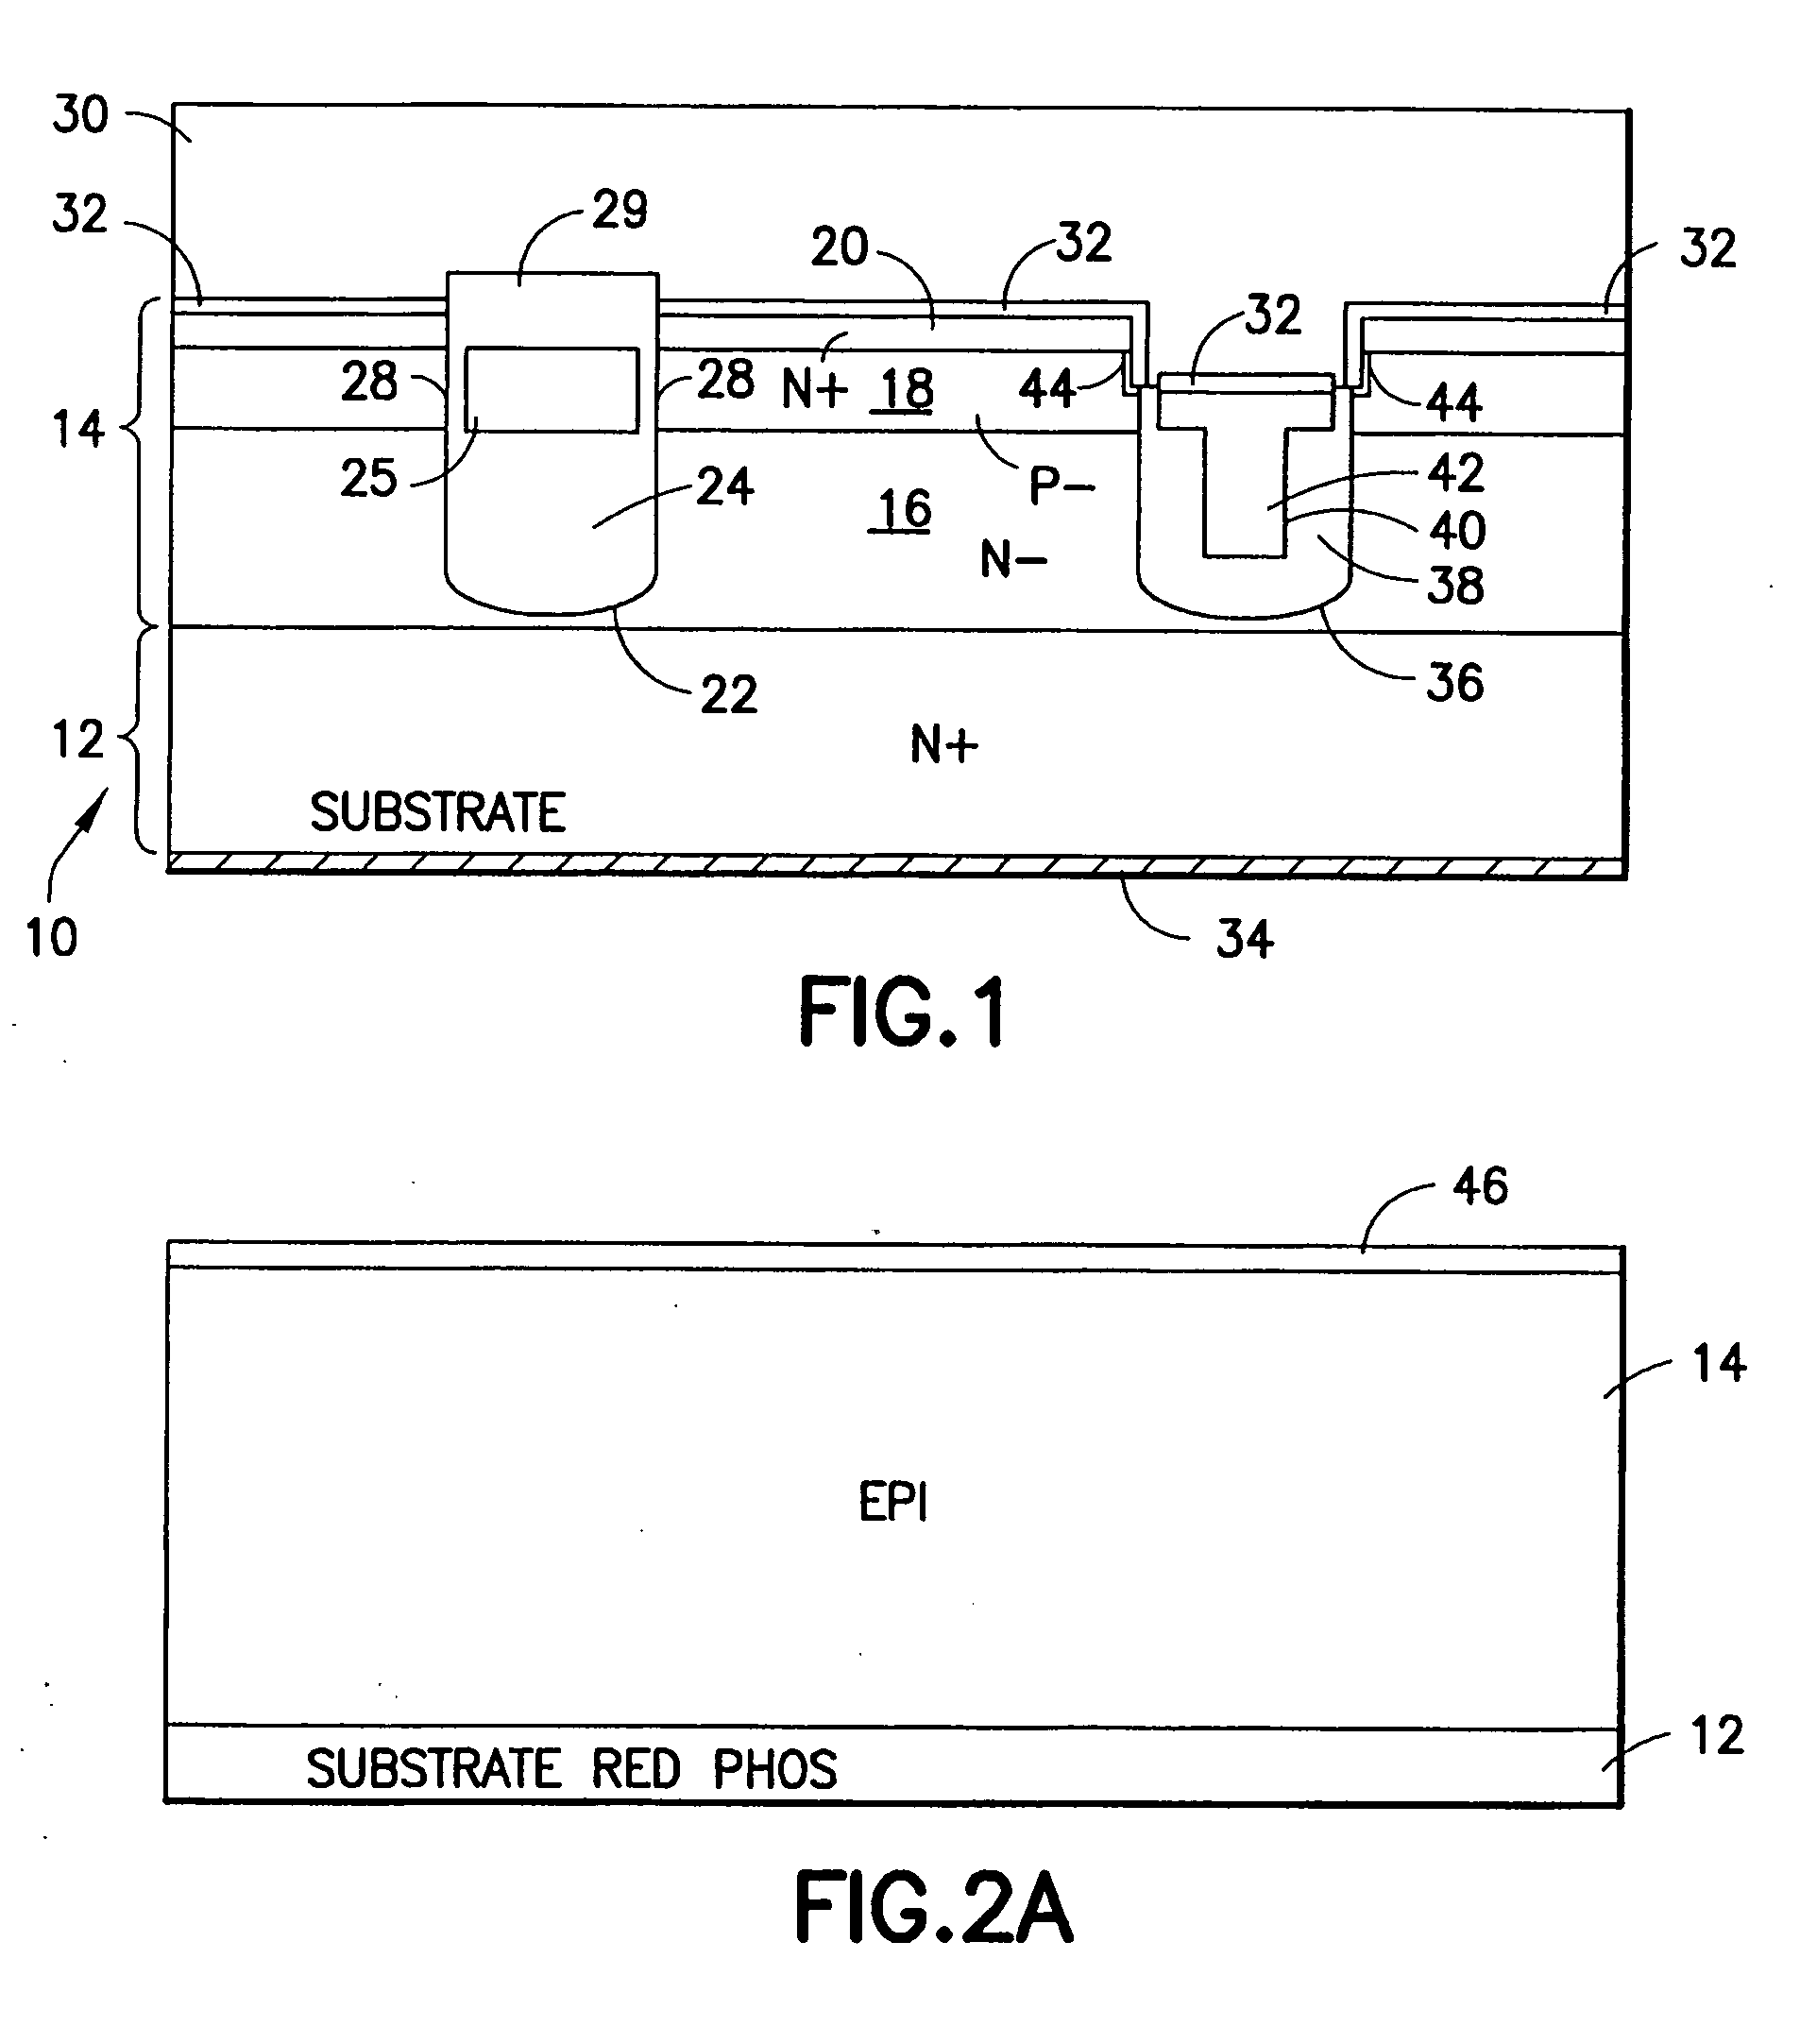 Trench MOSFET with deposited oxide